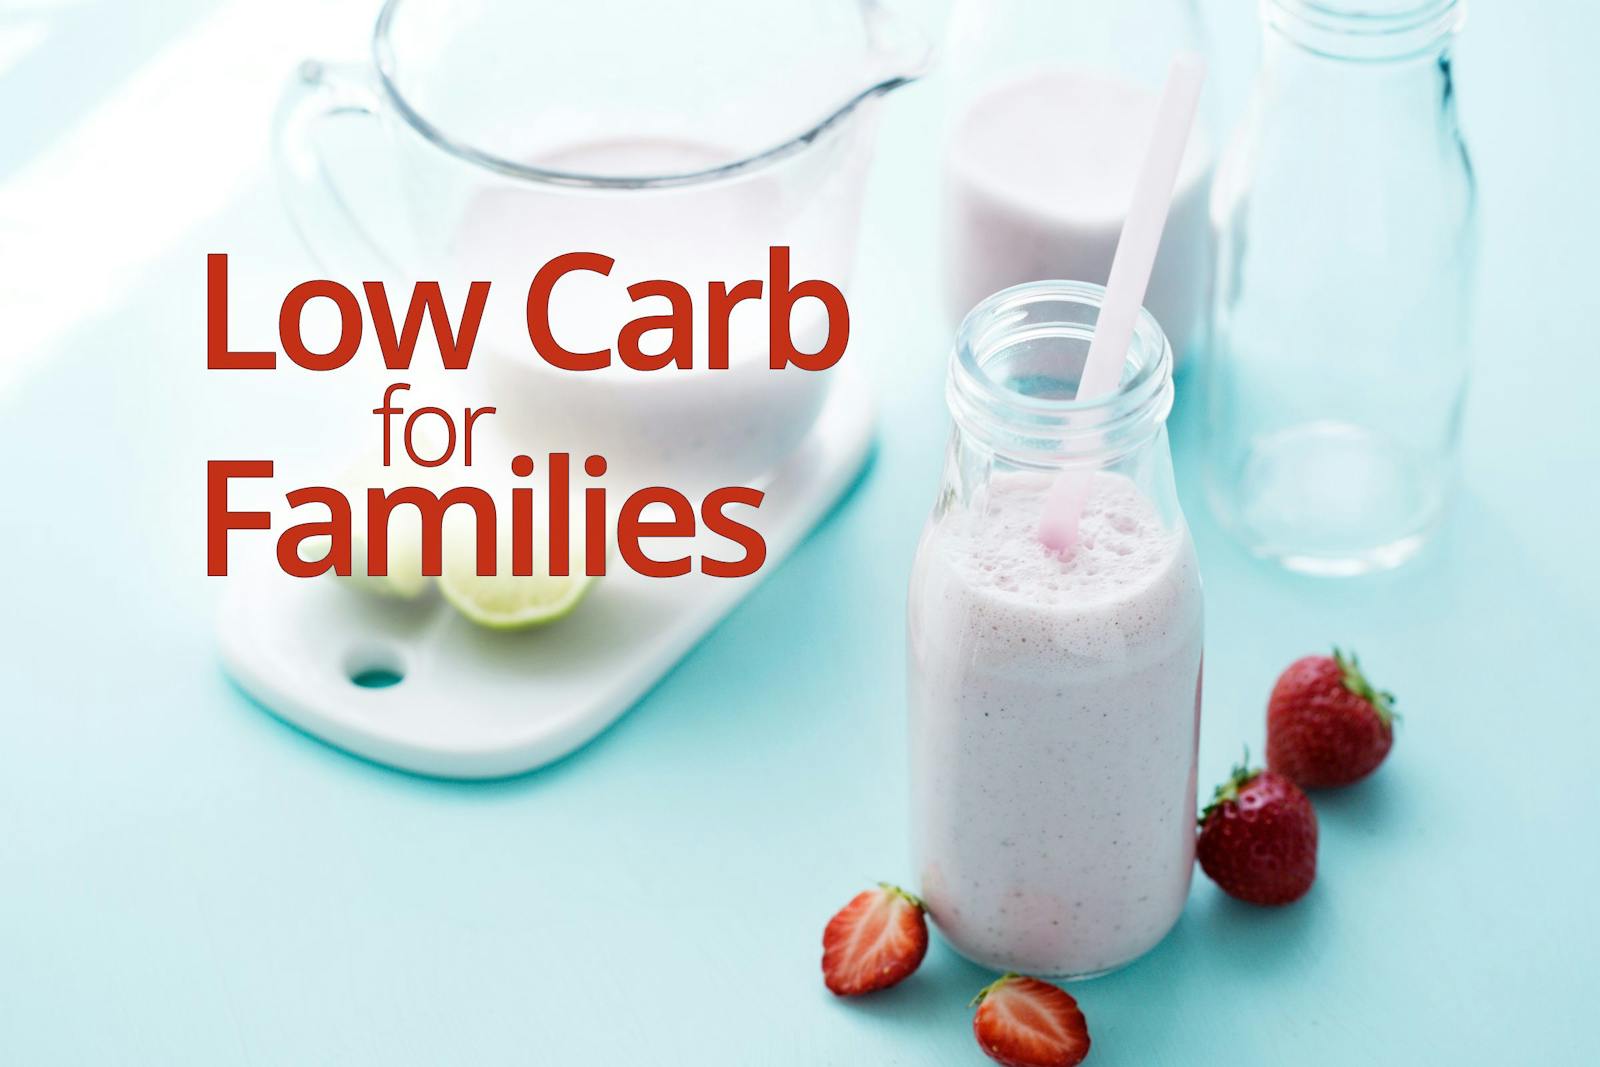 Low Carb for Families